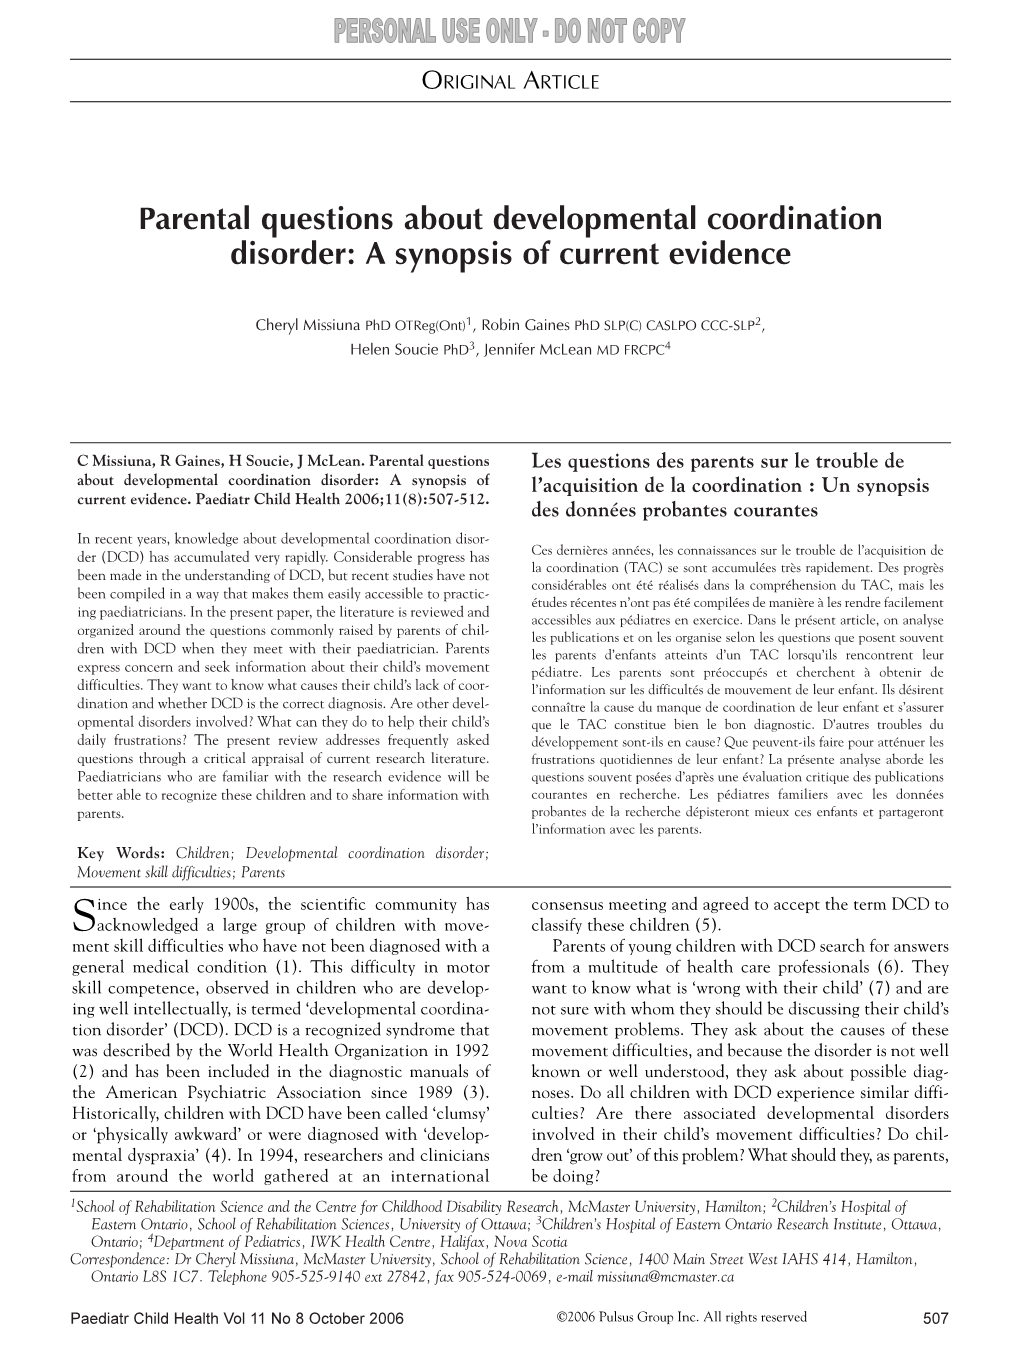 Parental Questions About Developmental Coordination Disorder: a Synopsis of Current Evidence